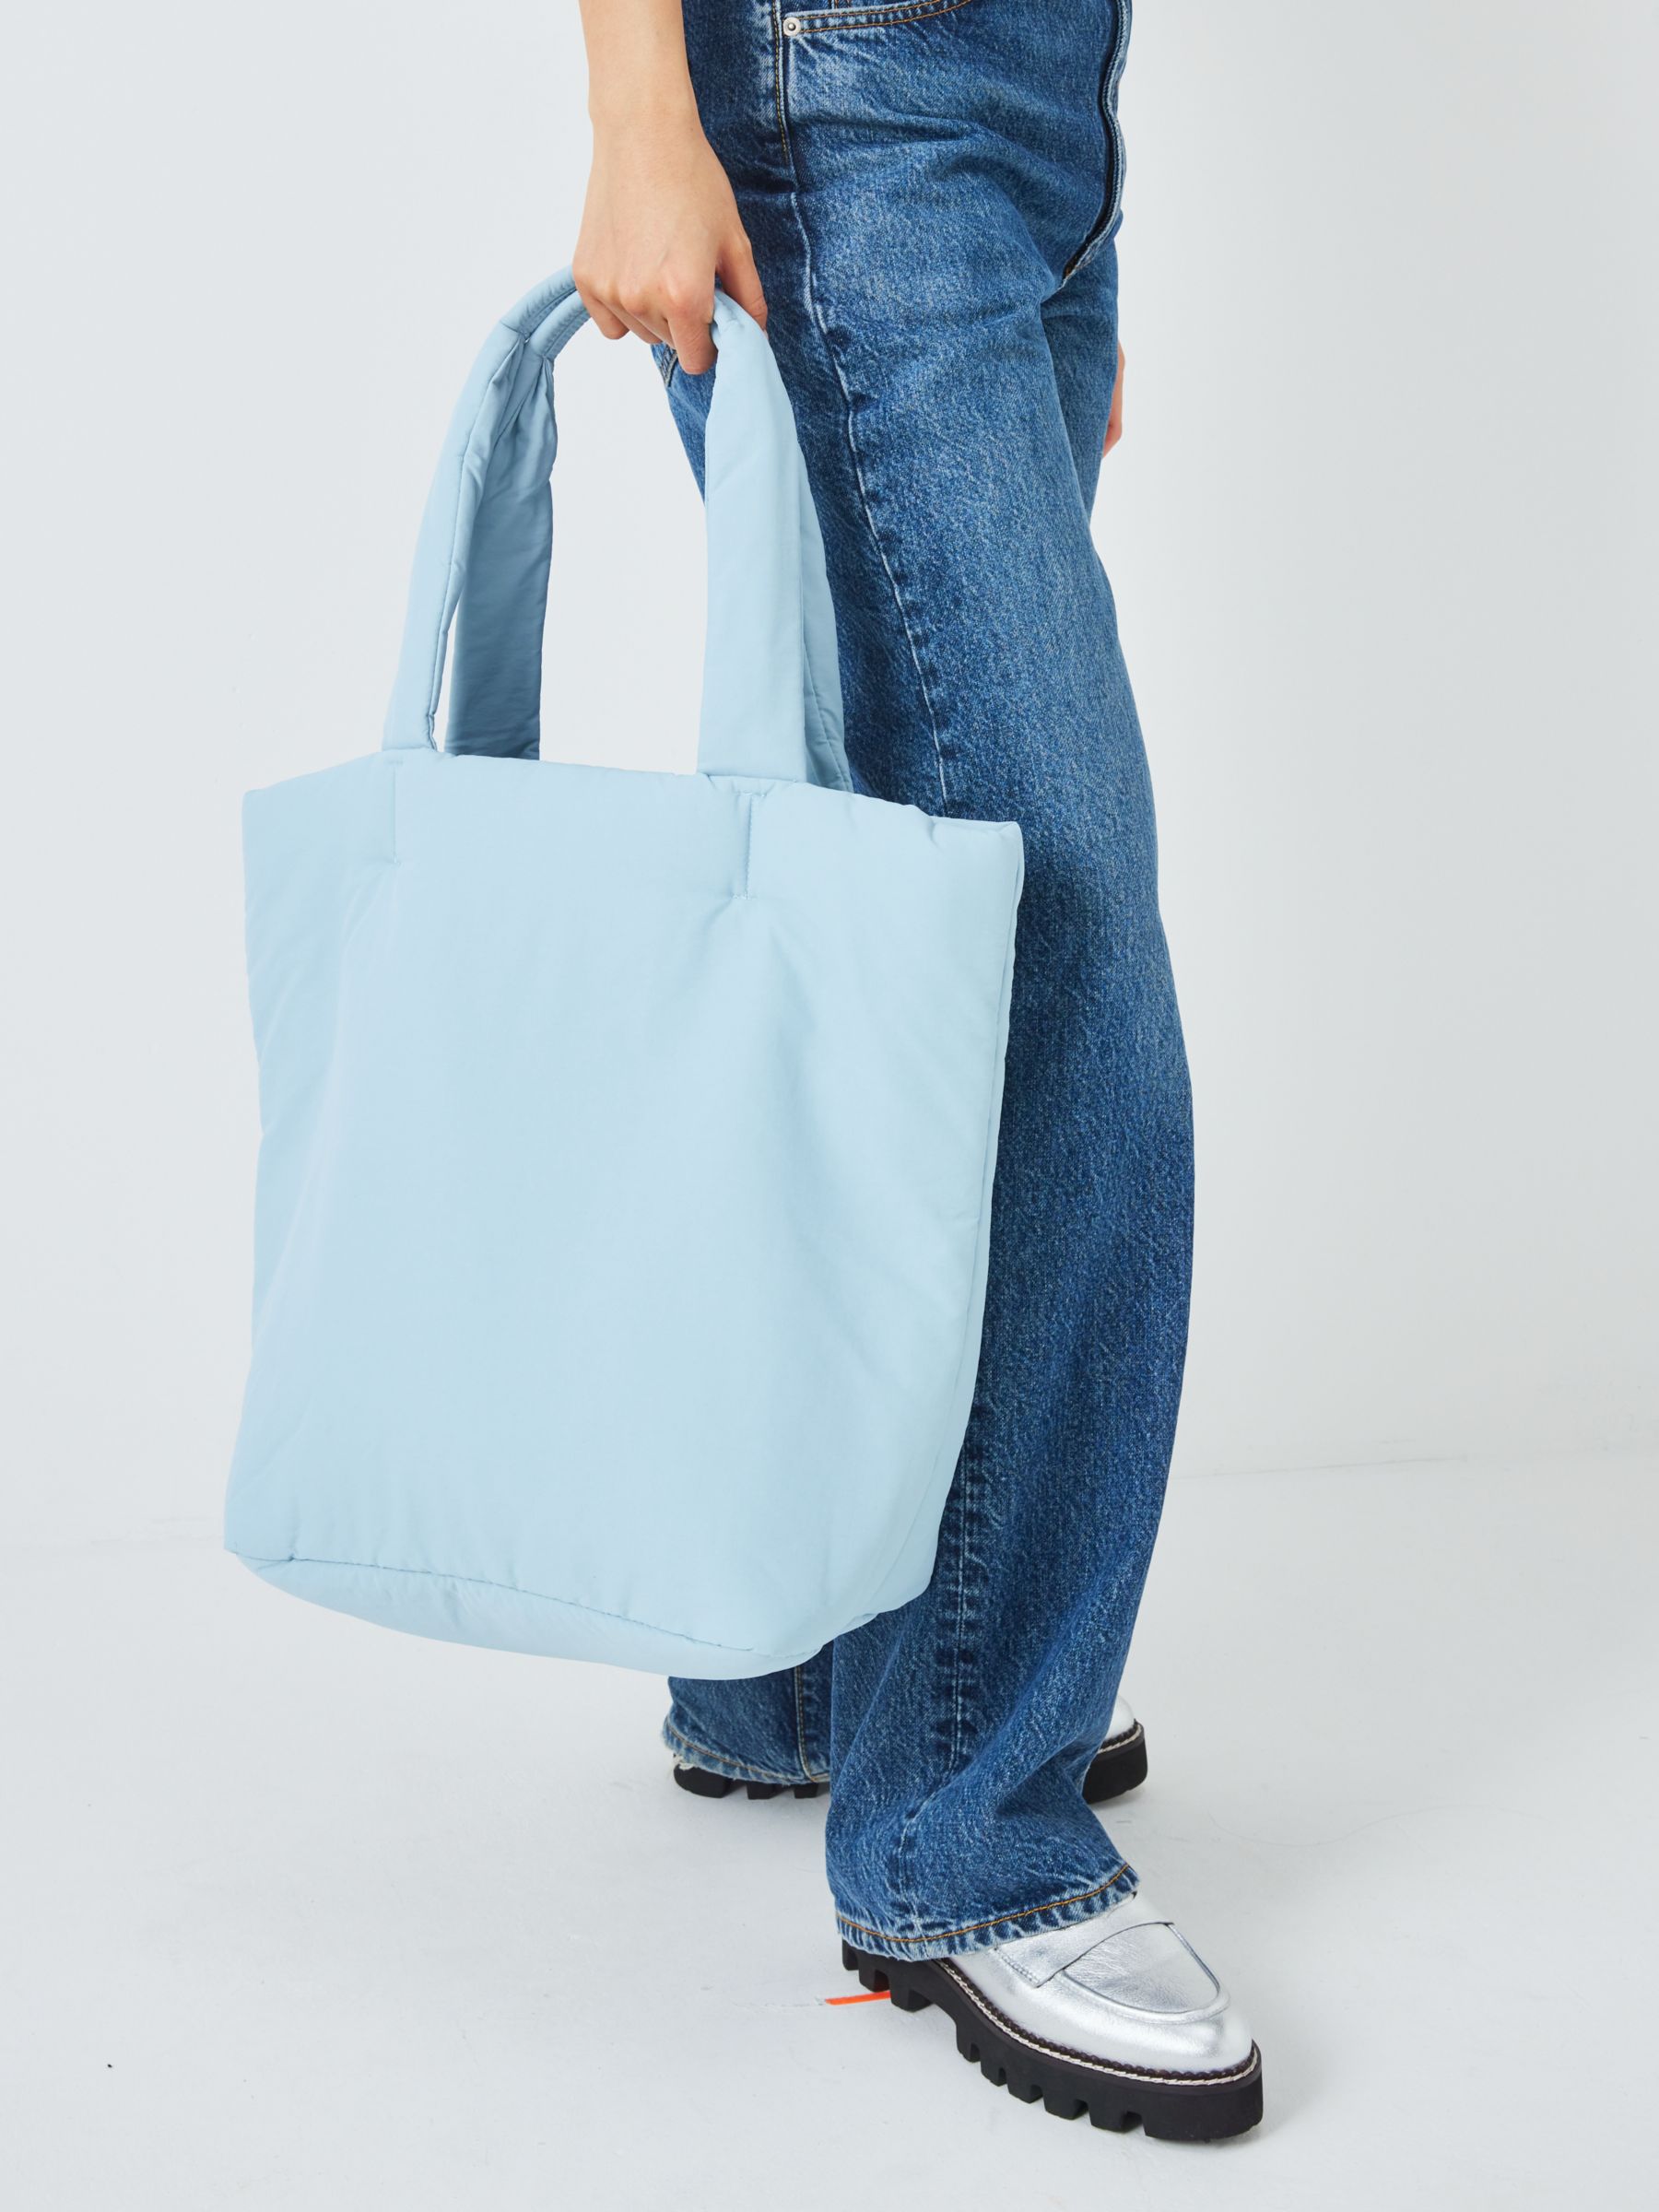 Buy John Lewis ANYDAY Puffy North South Tote Bag Online at johnlewis.com